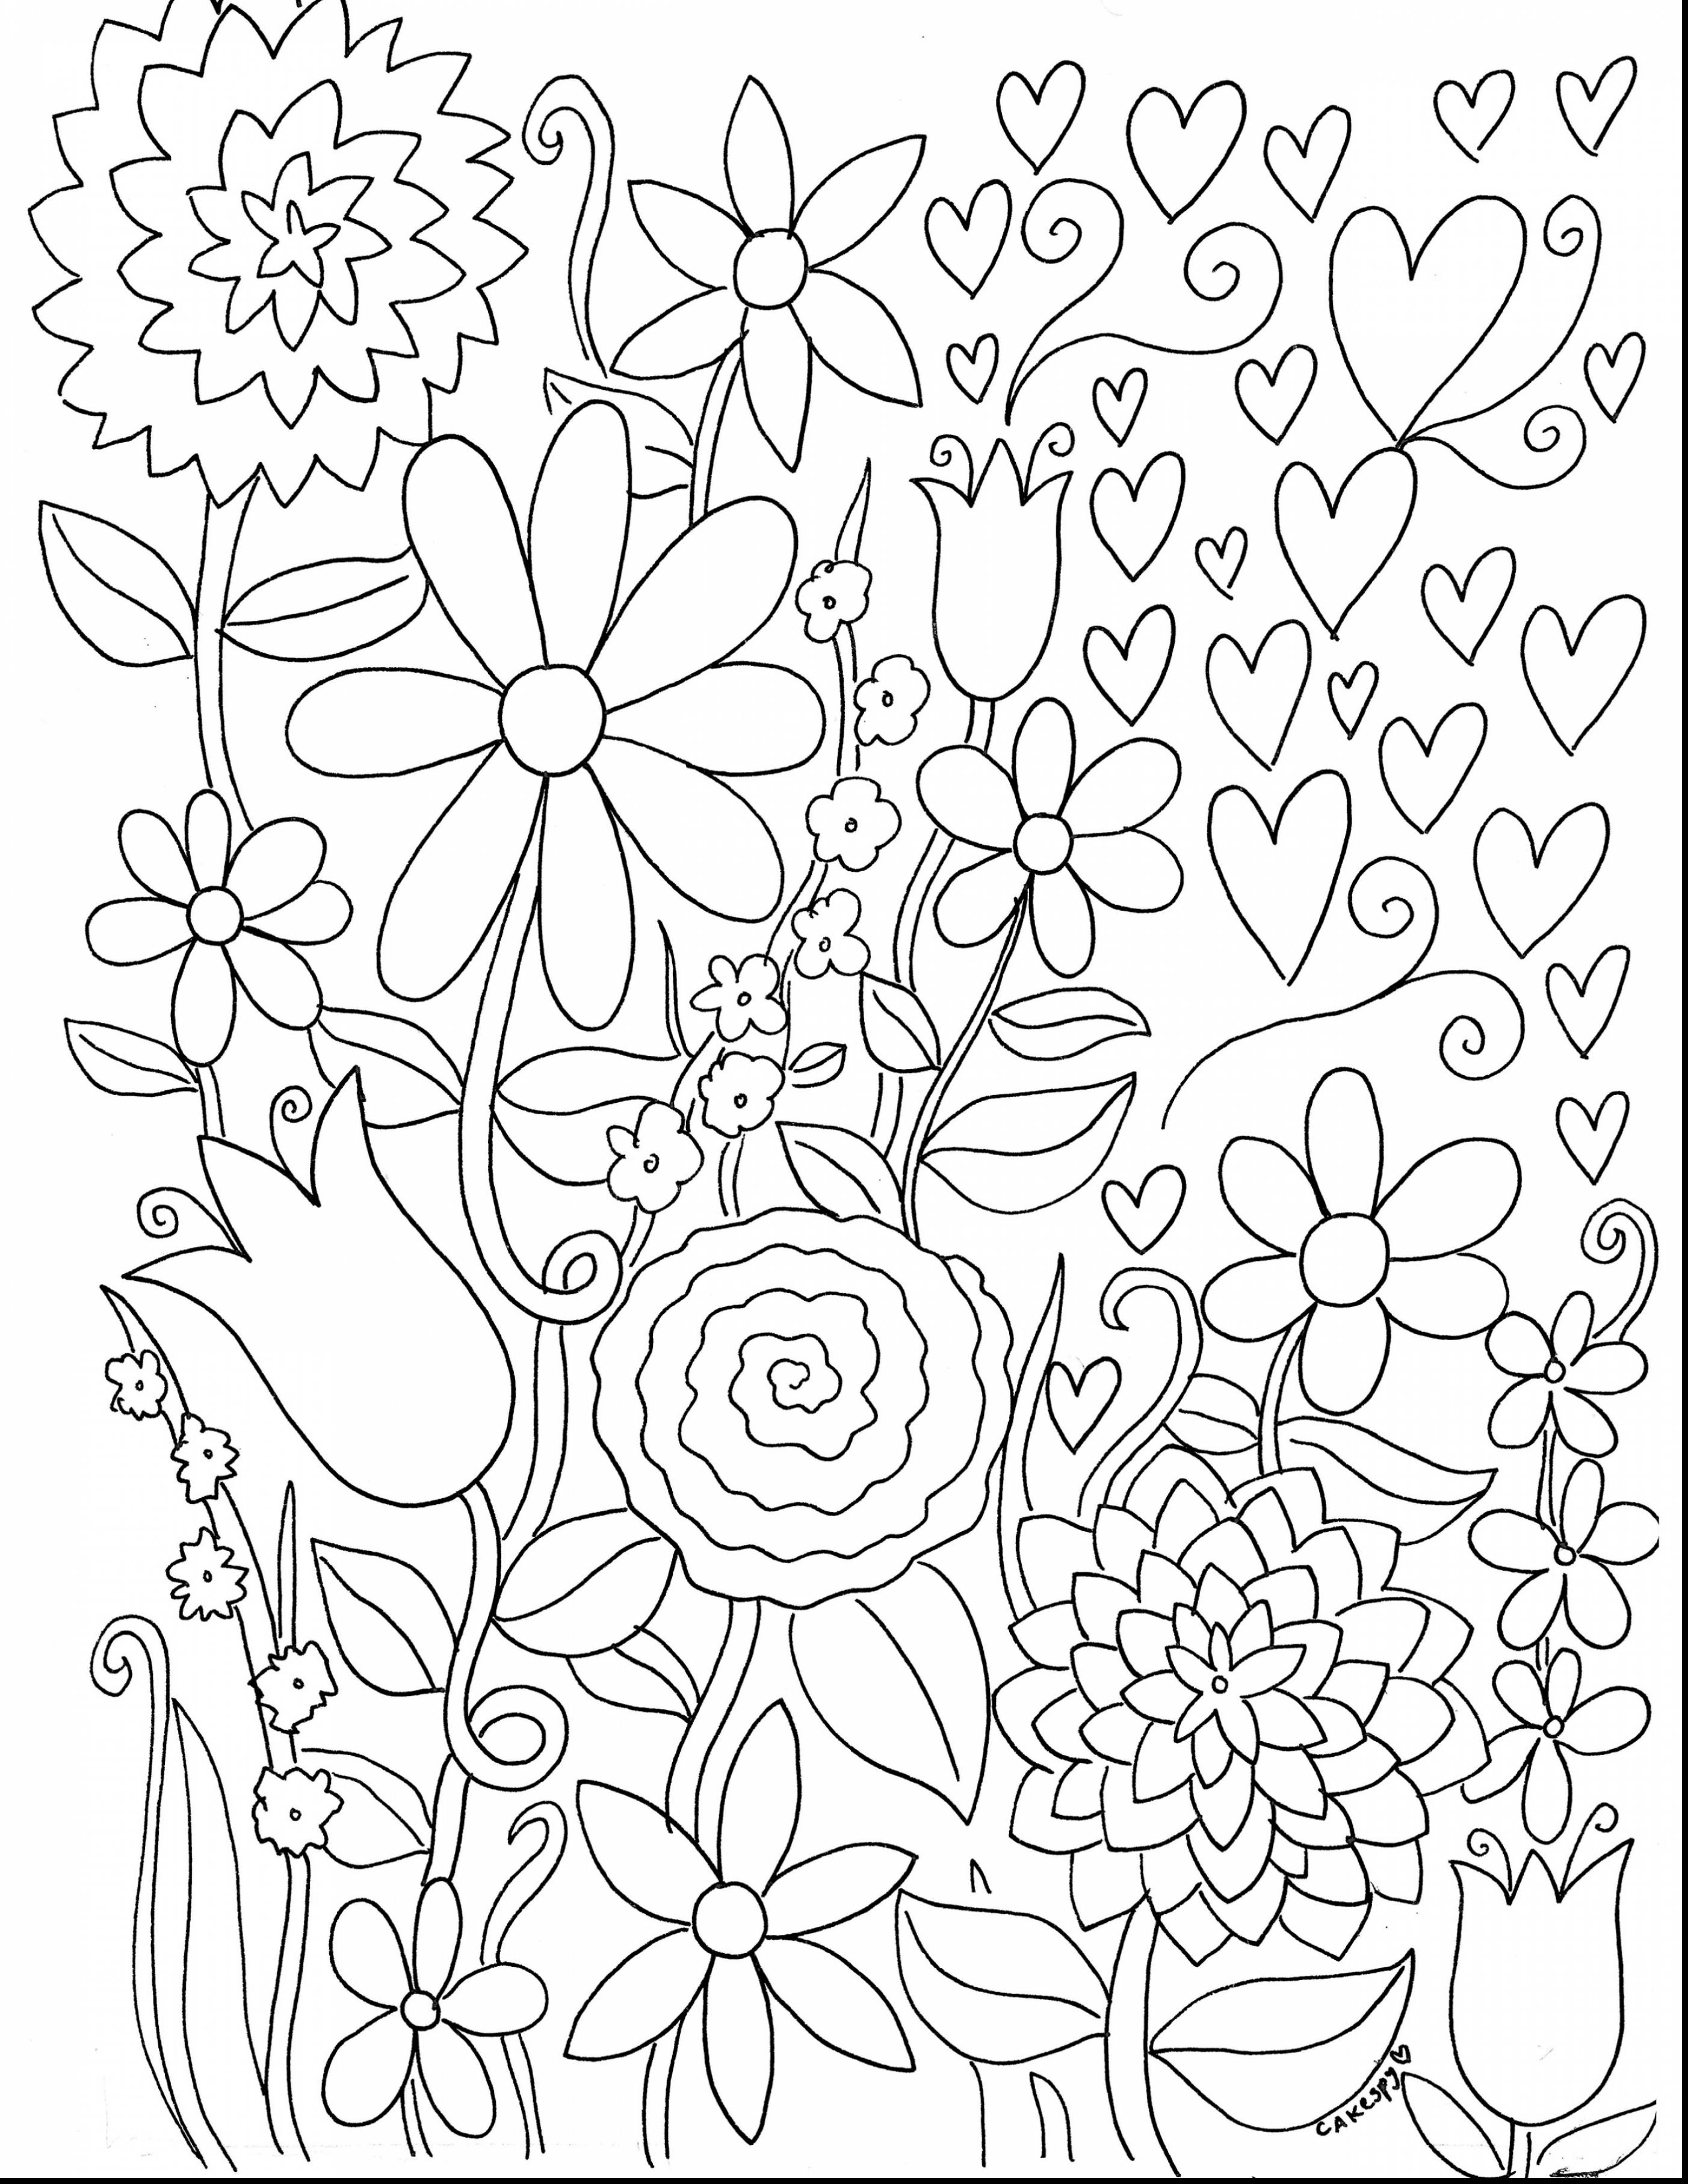 495 Animal Make A Picture Into A Coloring Page for Kindergarten